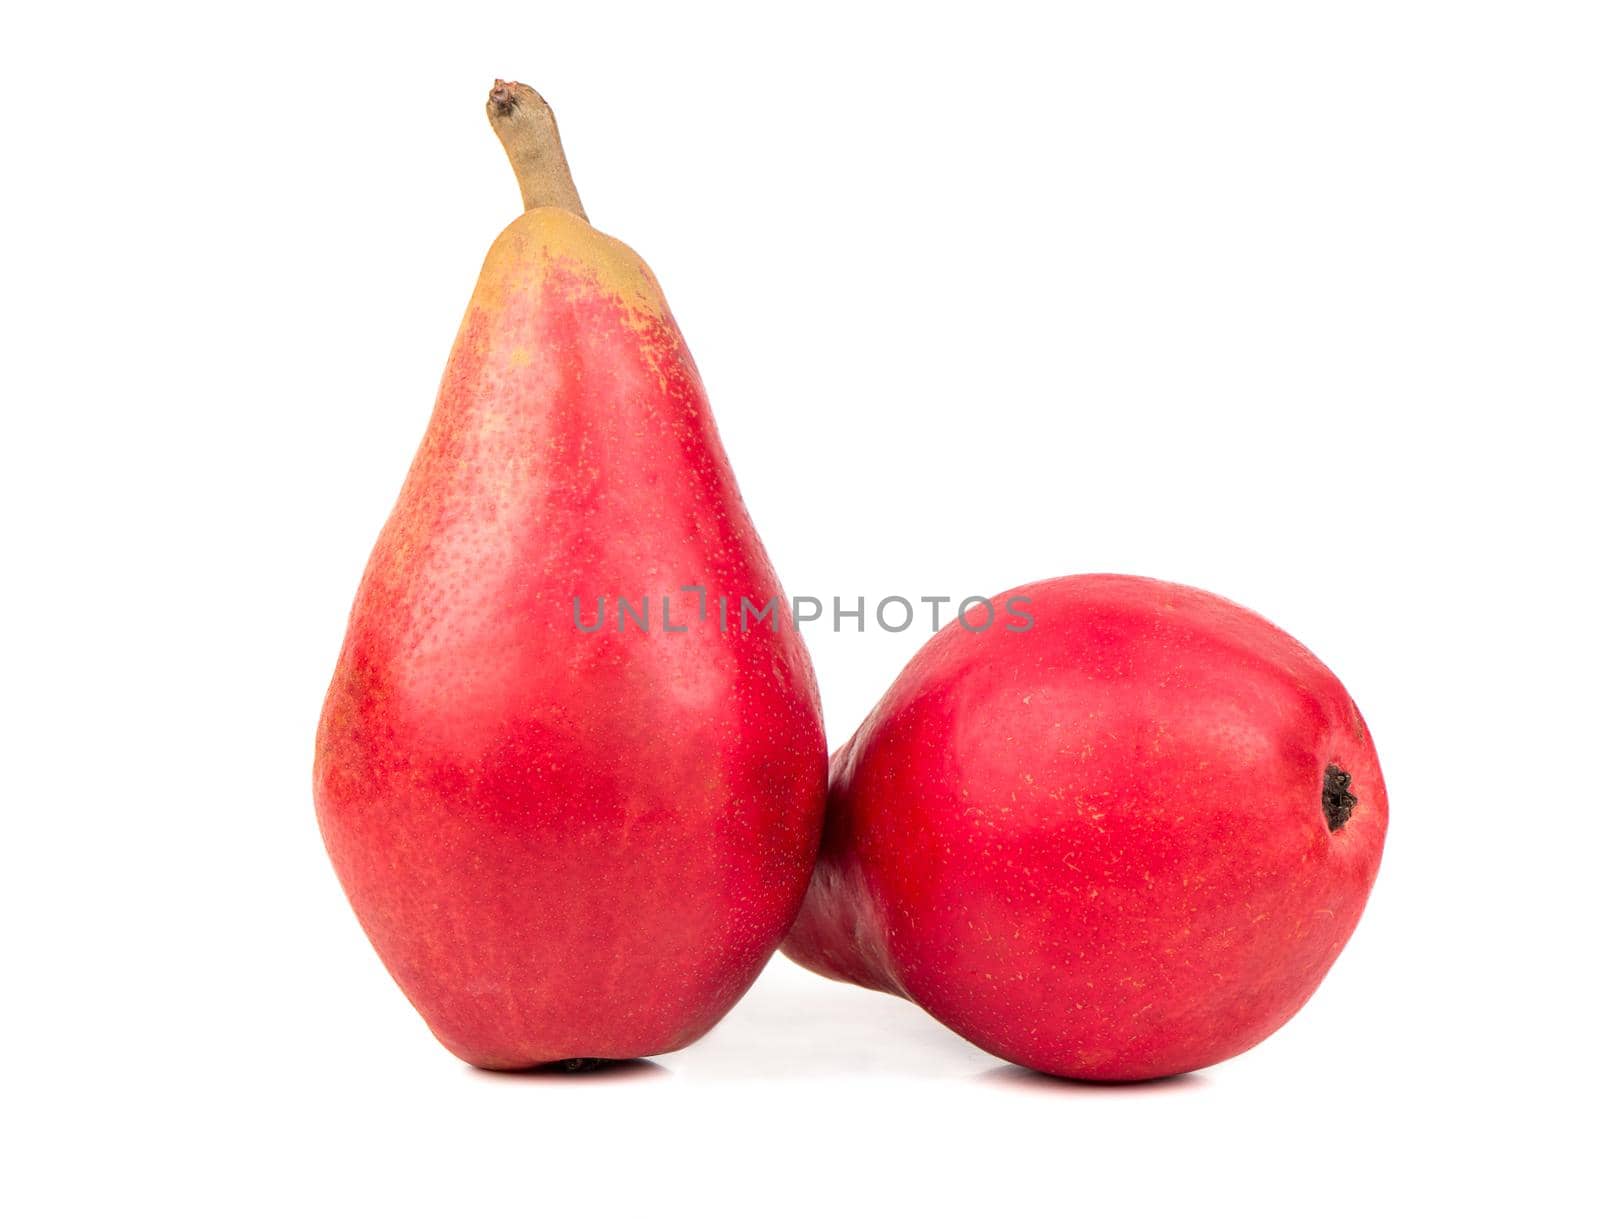 Two tasty red fruit pears isolated on a white background